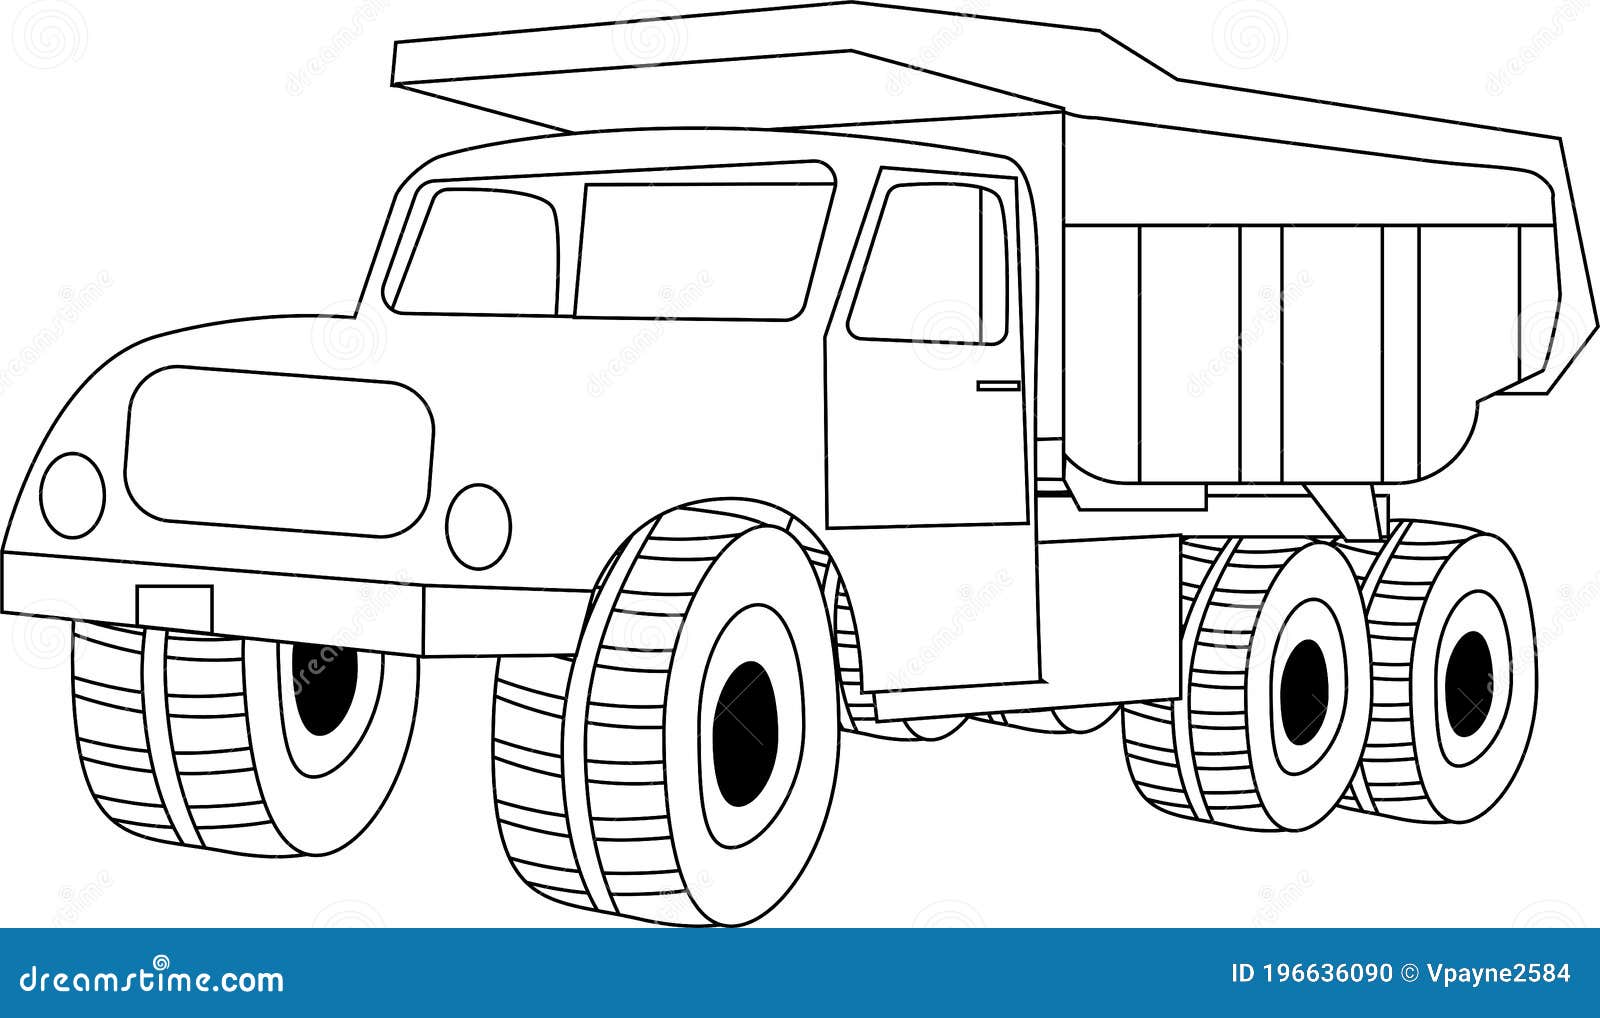 Dump truck coloring page outline for kids stock vector